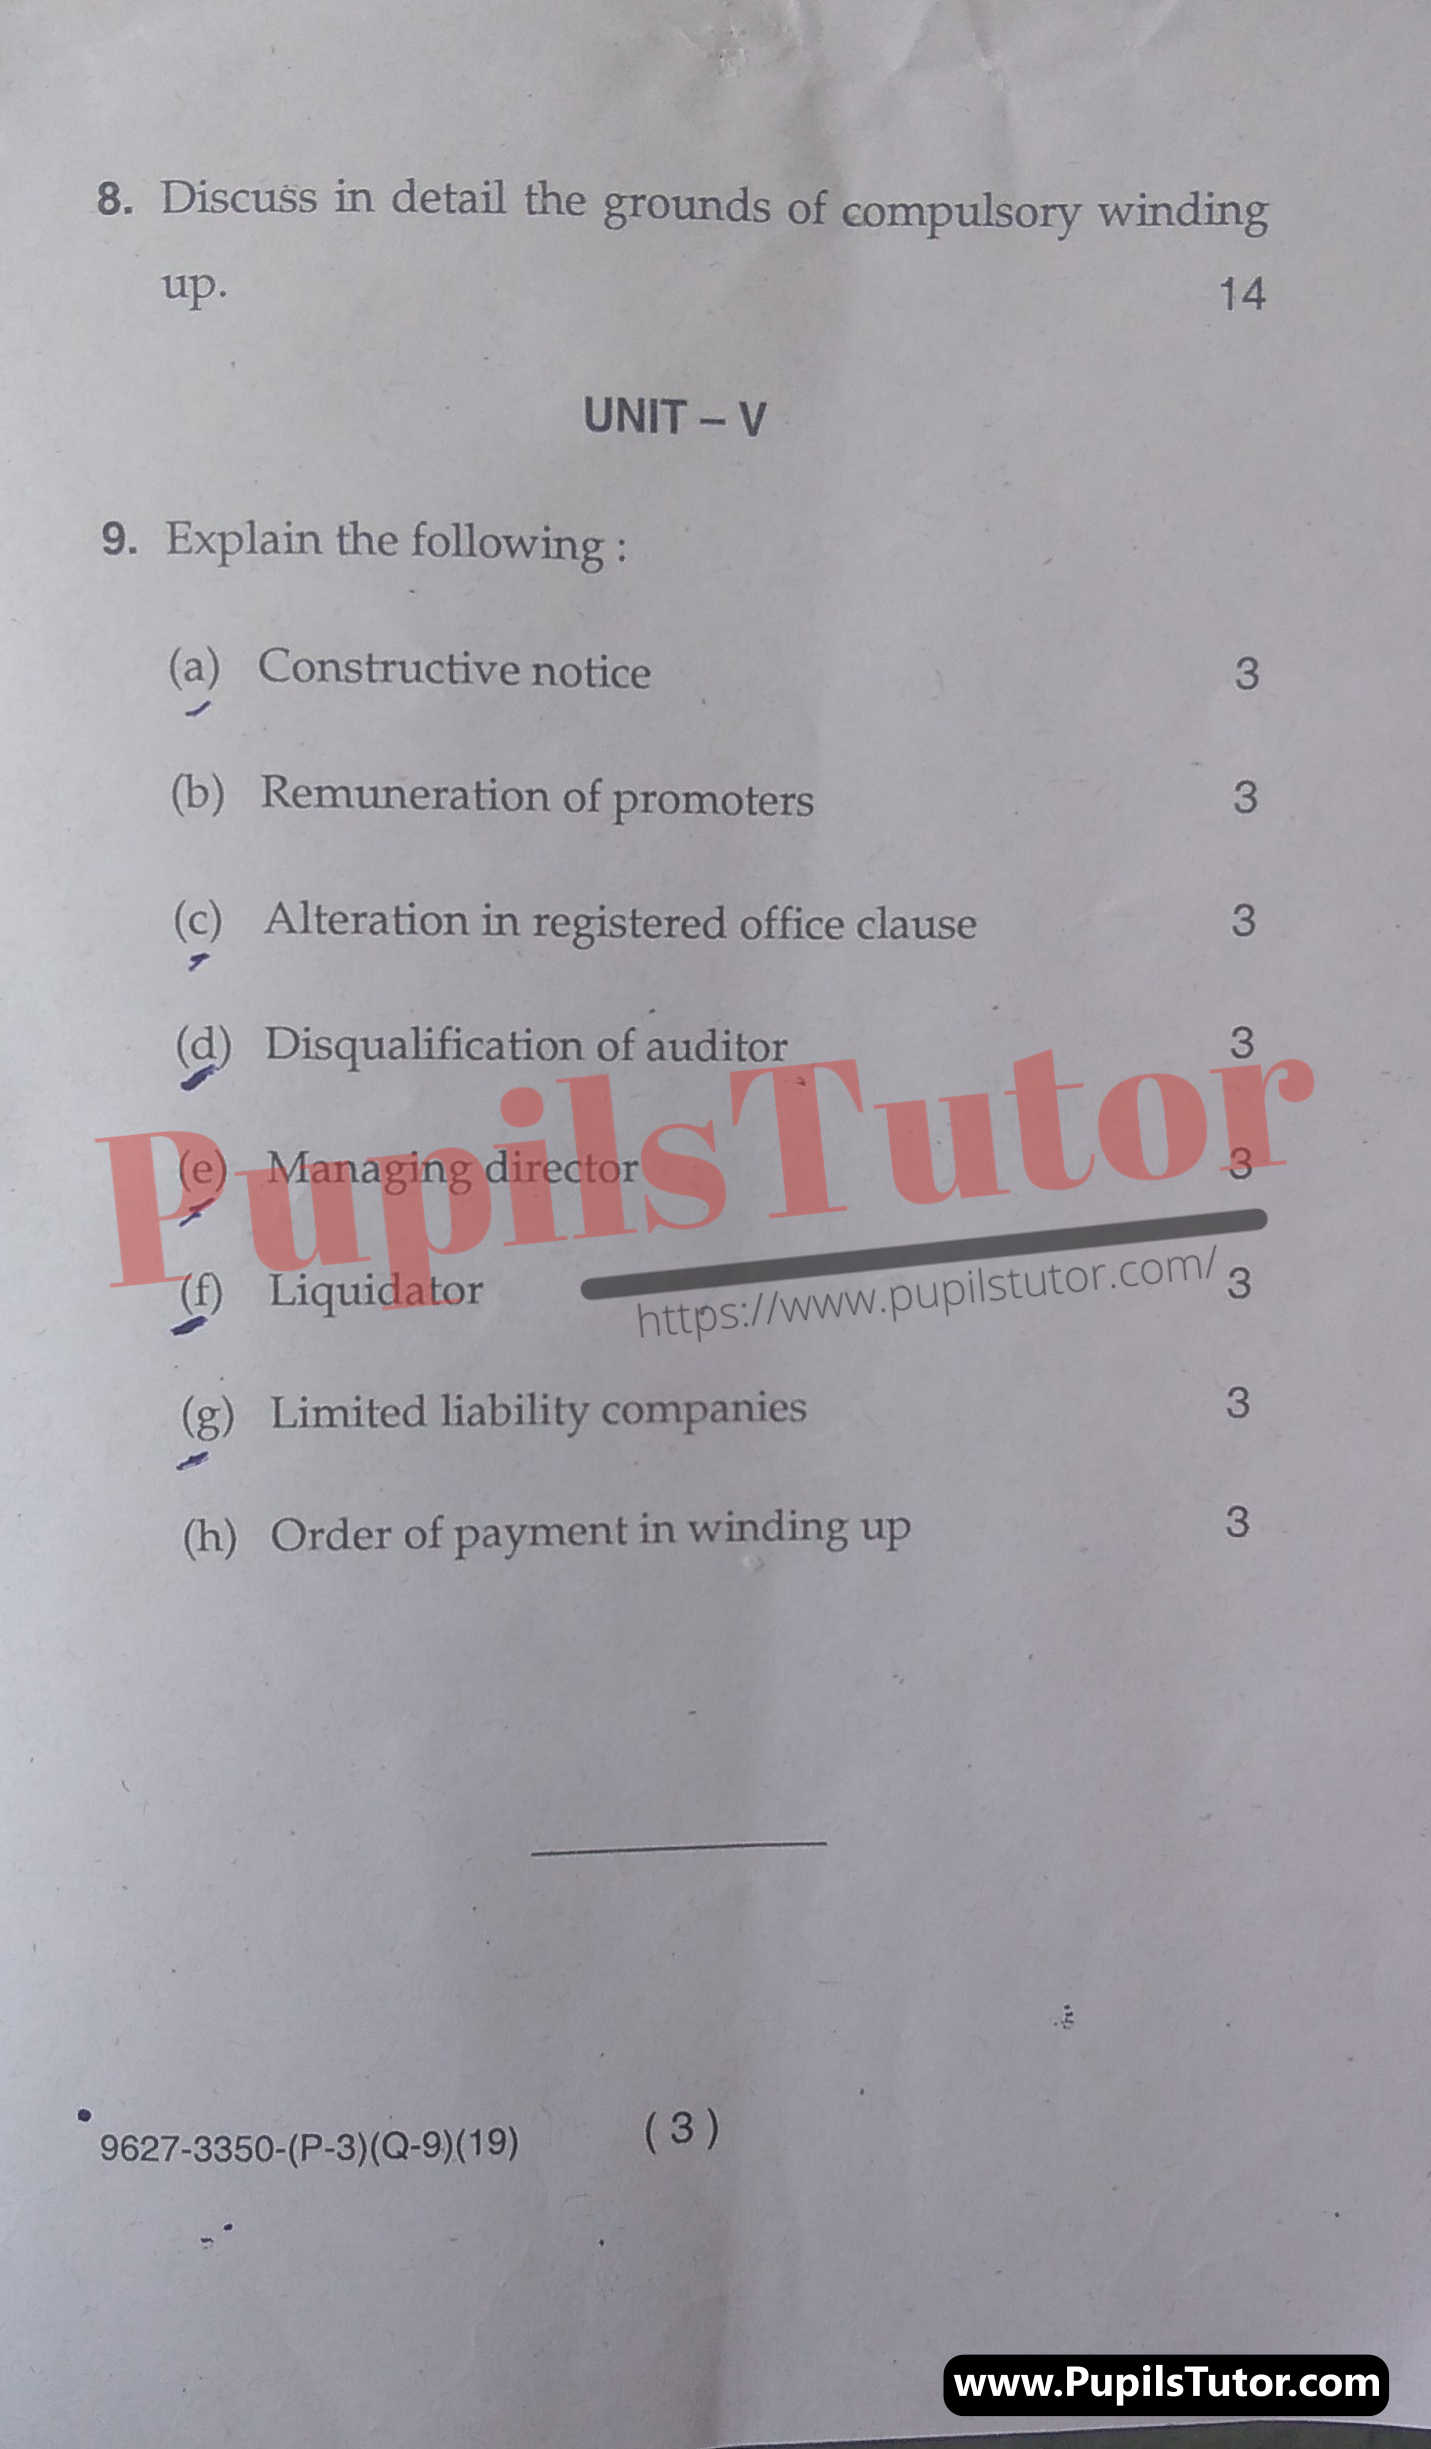 Free Download PDF Of M.D. University LL.B. First Semester Latest Question Paper For Company Law Subject (Page 3) - https://www.pupilstutor.com